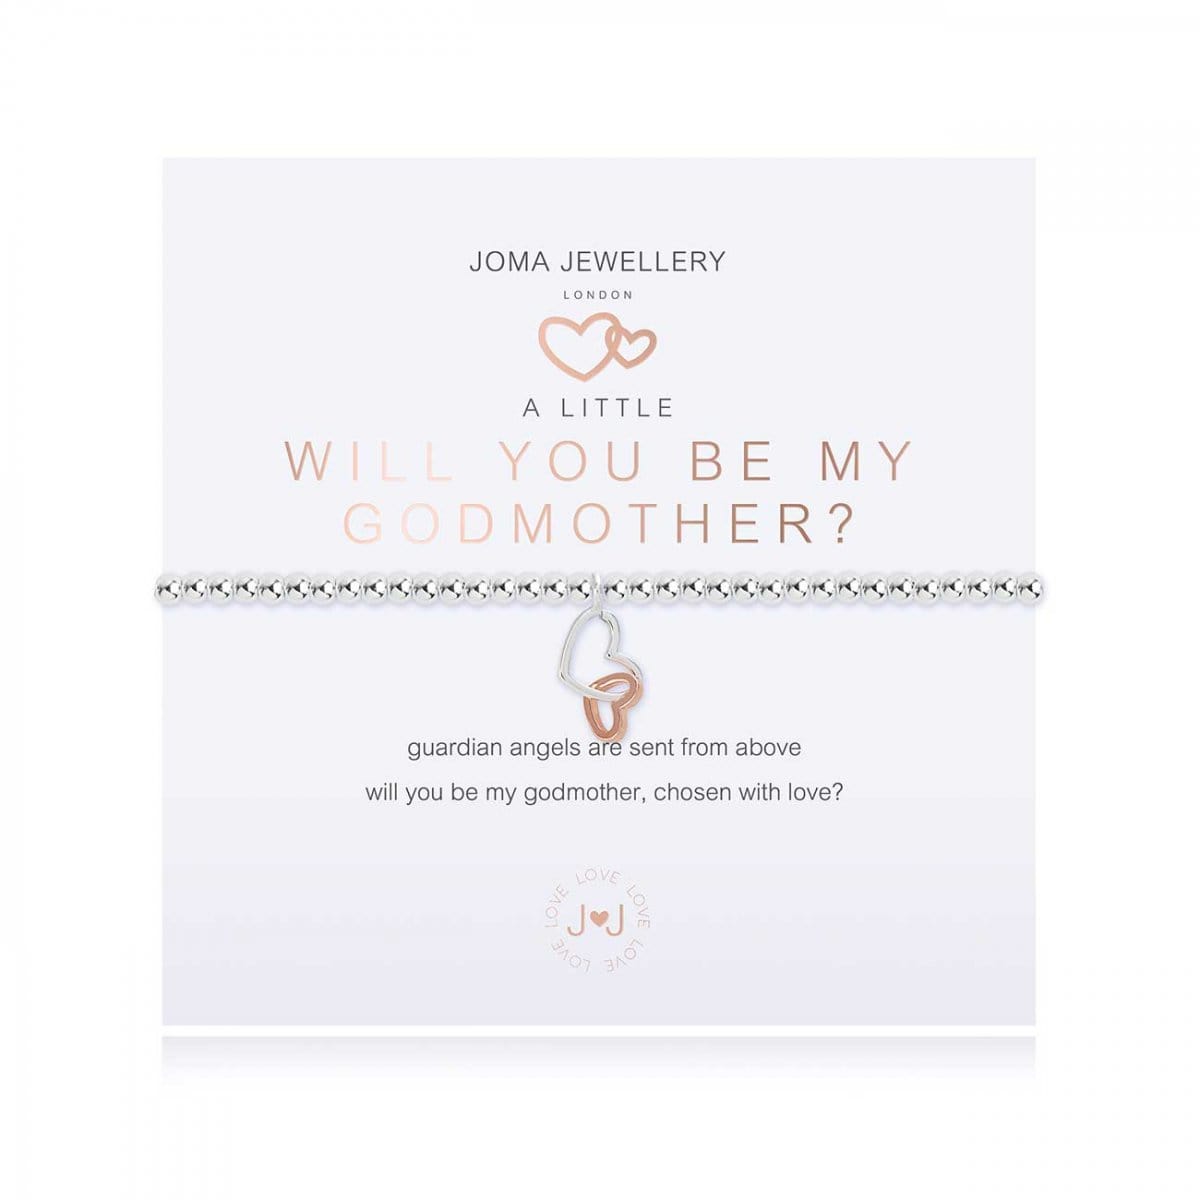 Joma Jewellery Bracelet Joma Jewellery Bracelet - a little Will You Be My Godmother